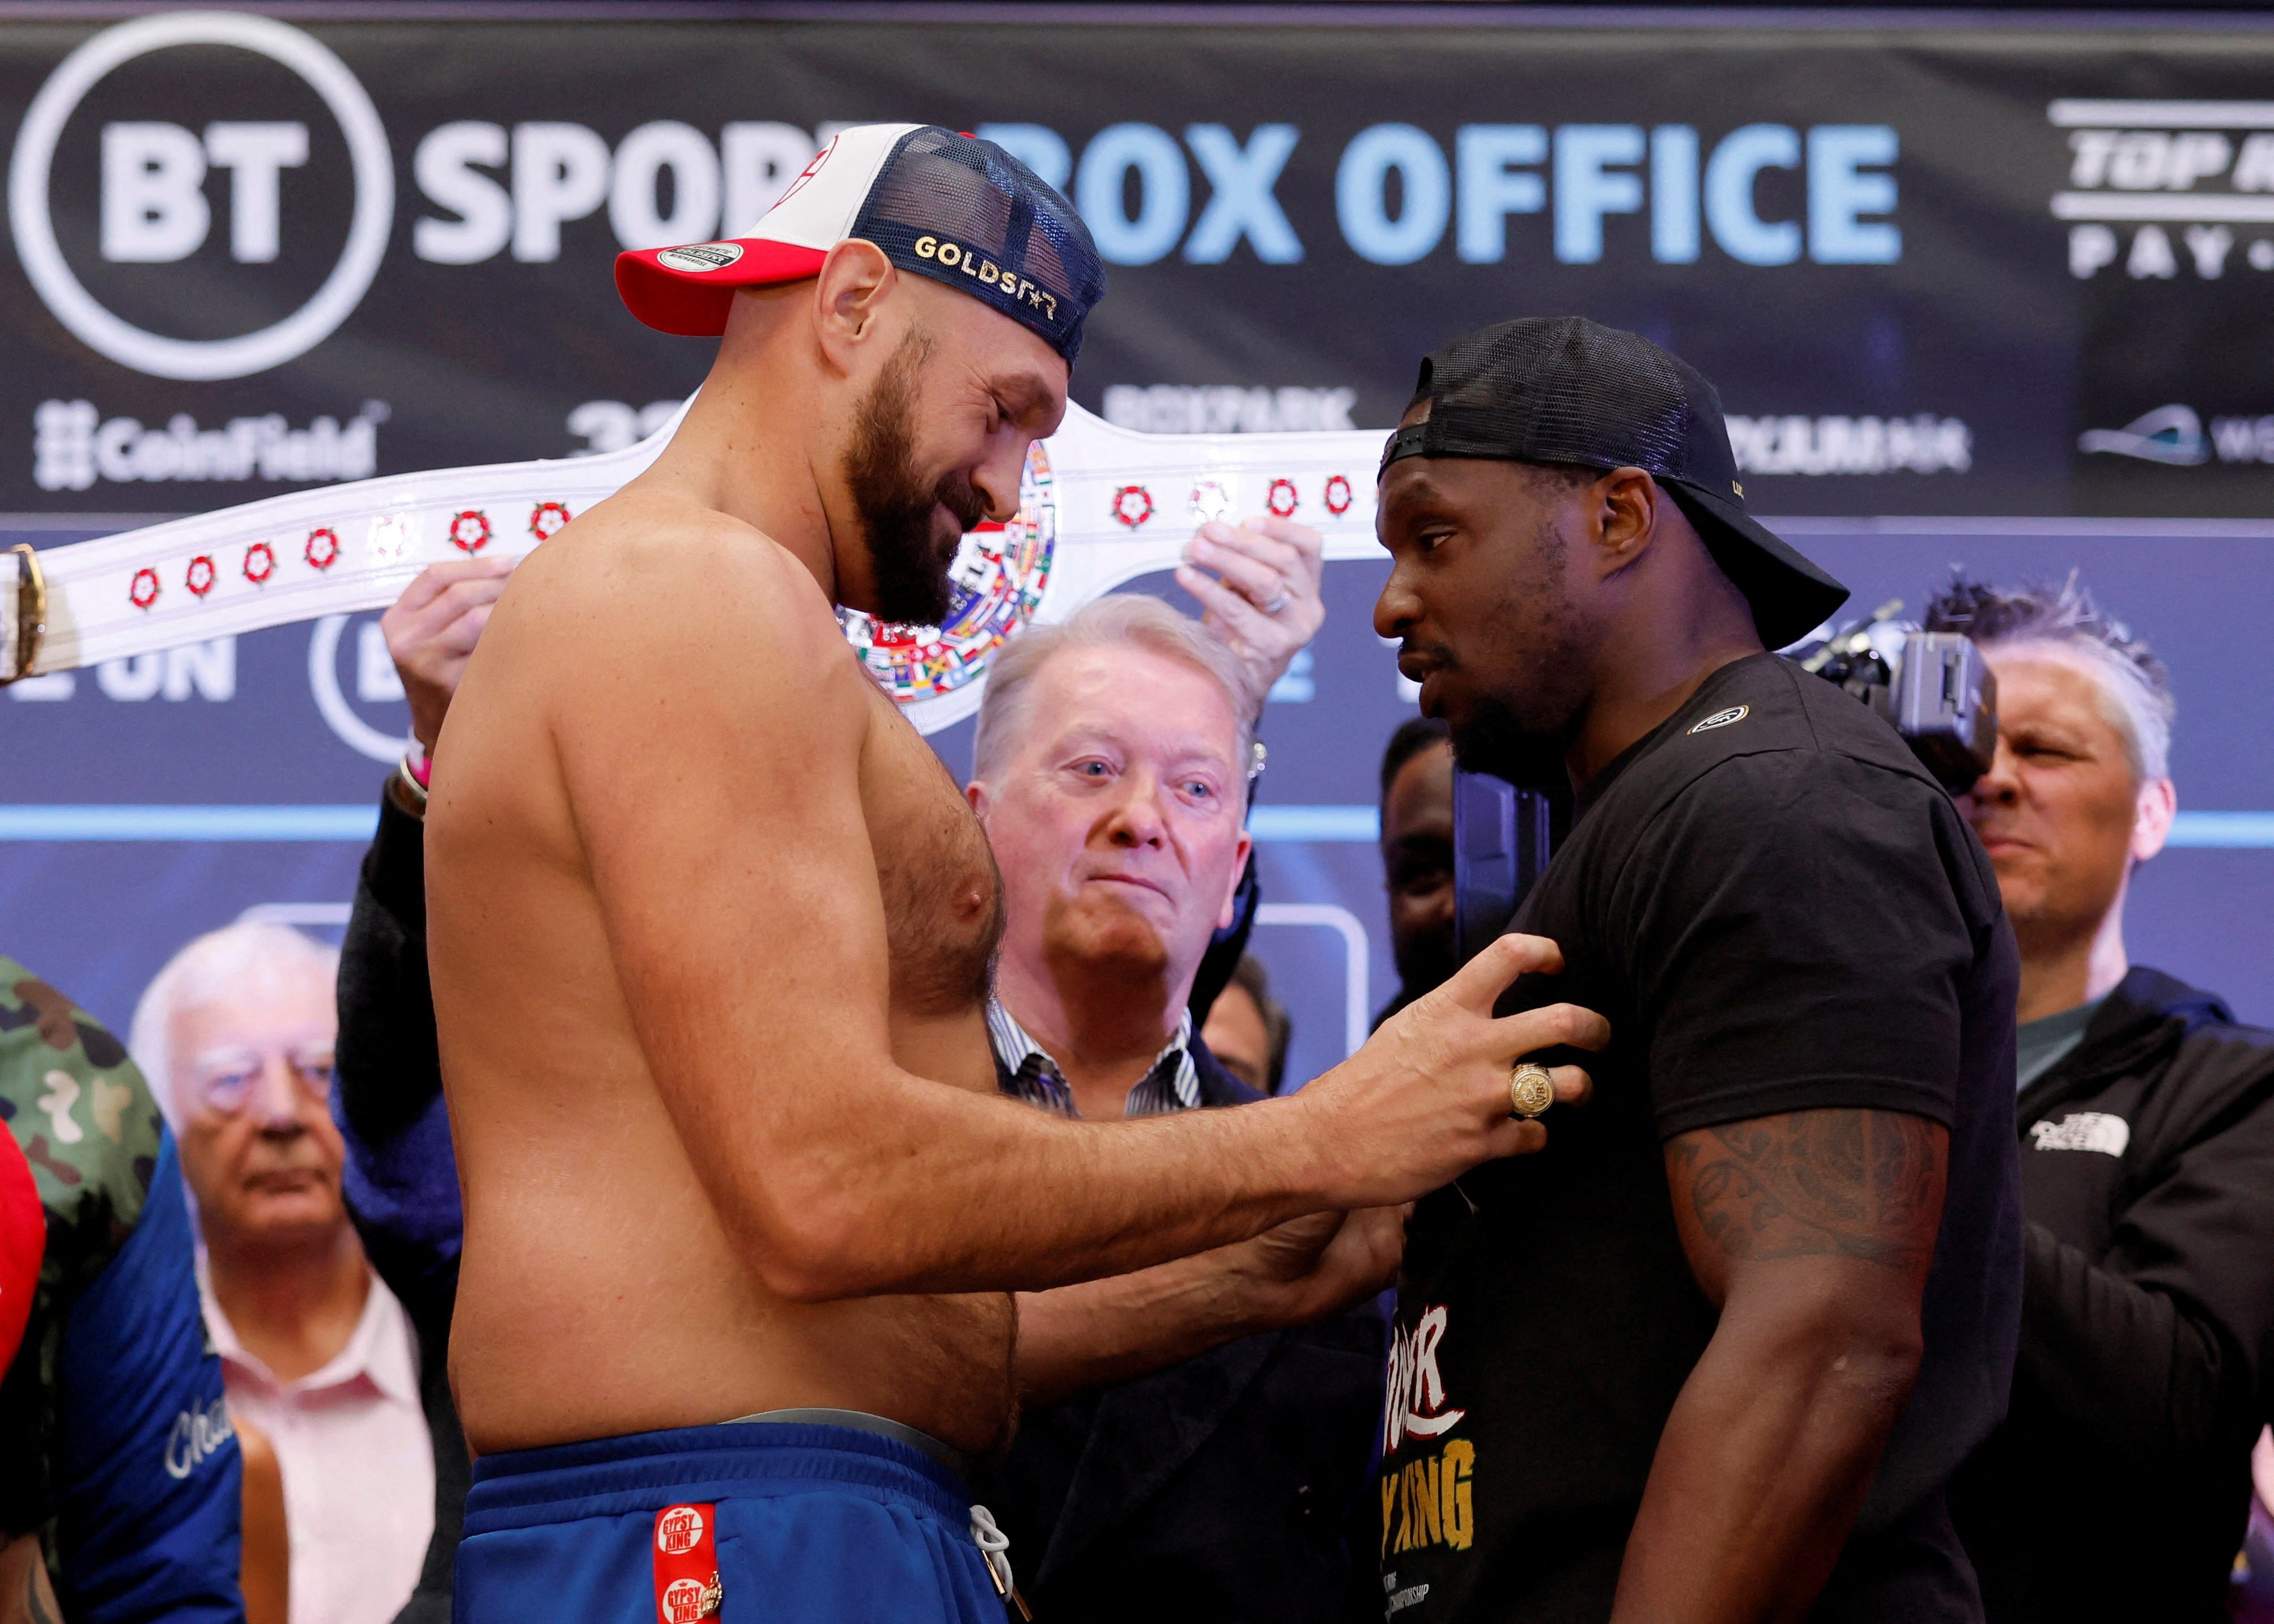 Tyson Fury (left) and Dillian Whyte go head to head during their weigh-in before the clash at Wembley. Photo: Action Images via Reuters